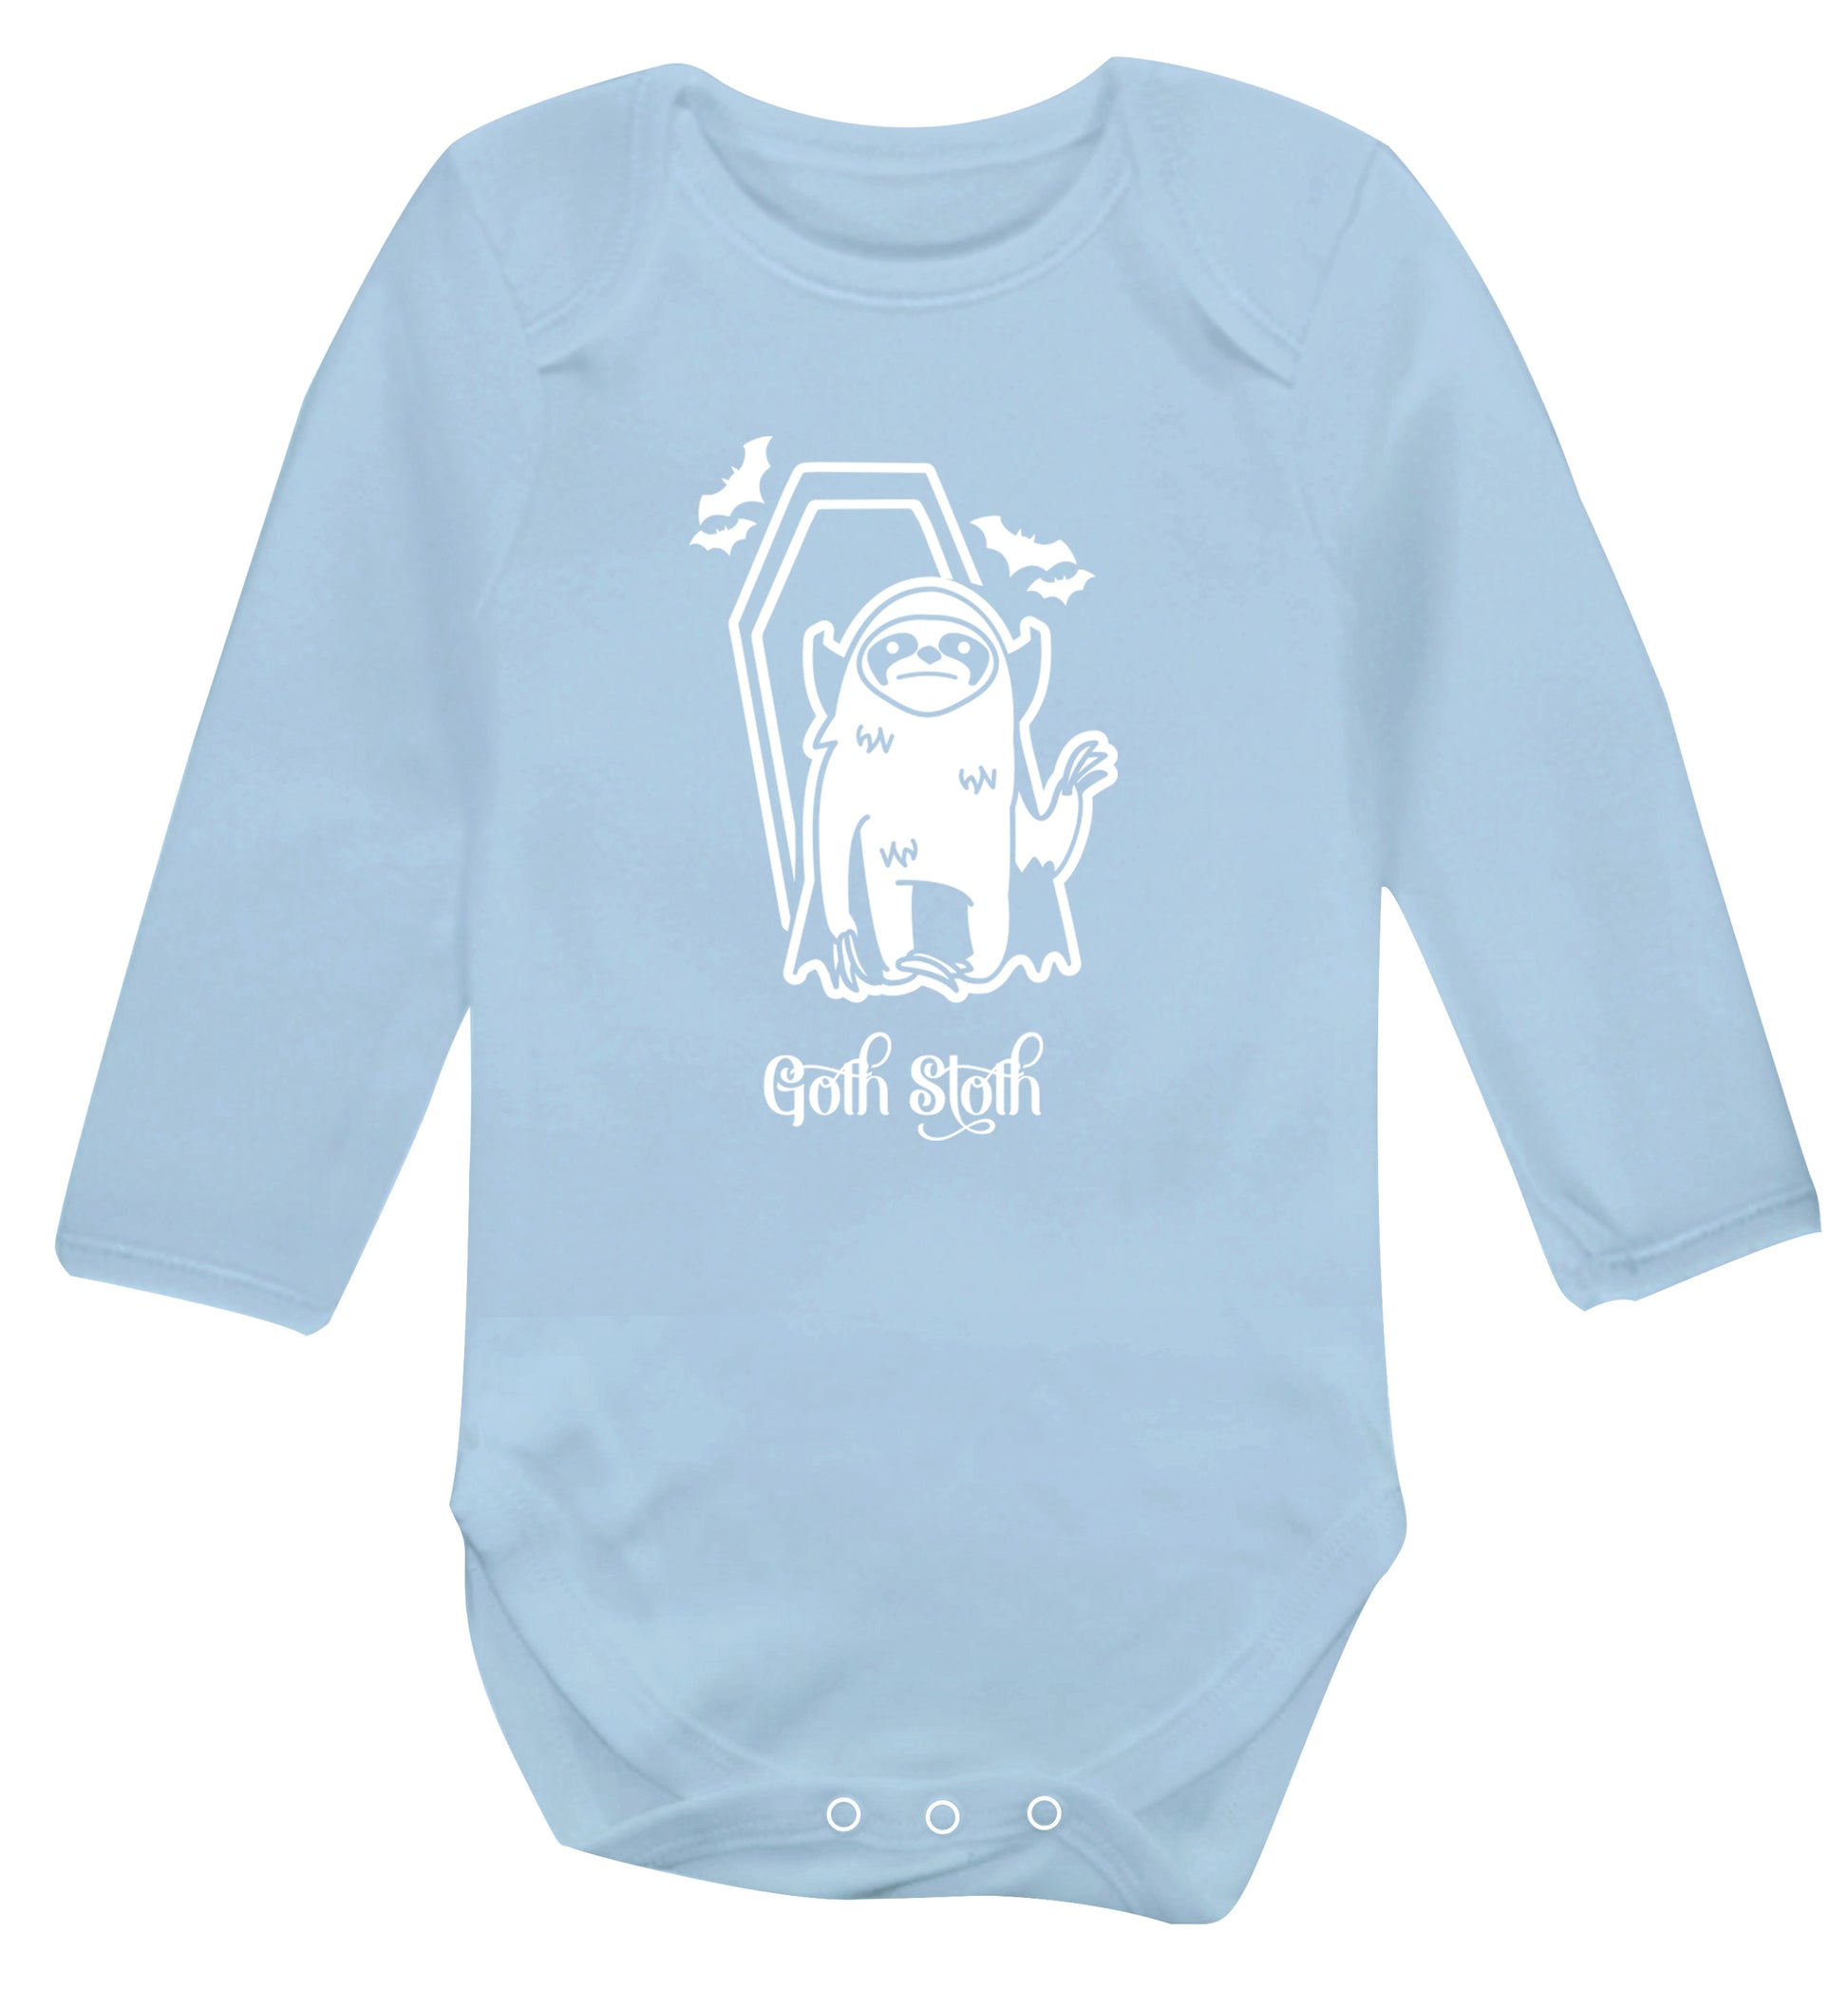 Goth Sloth Baby Vest long sleeved pale blue 6-12 months